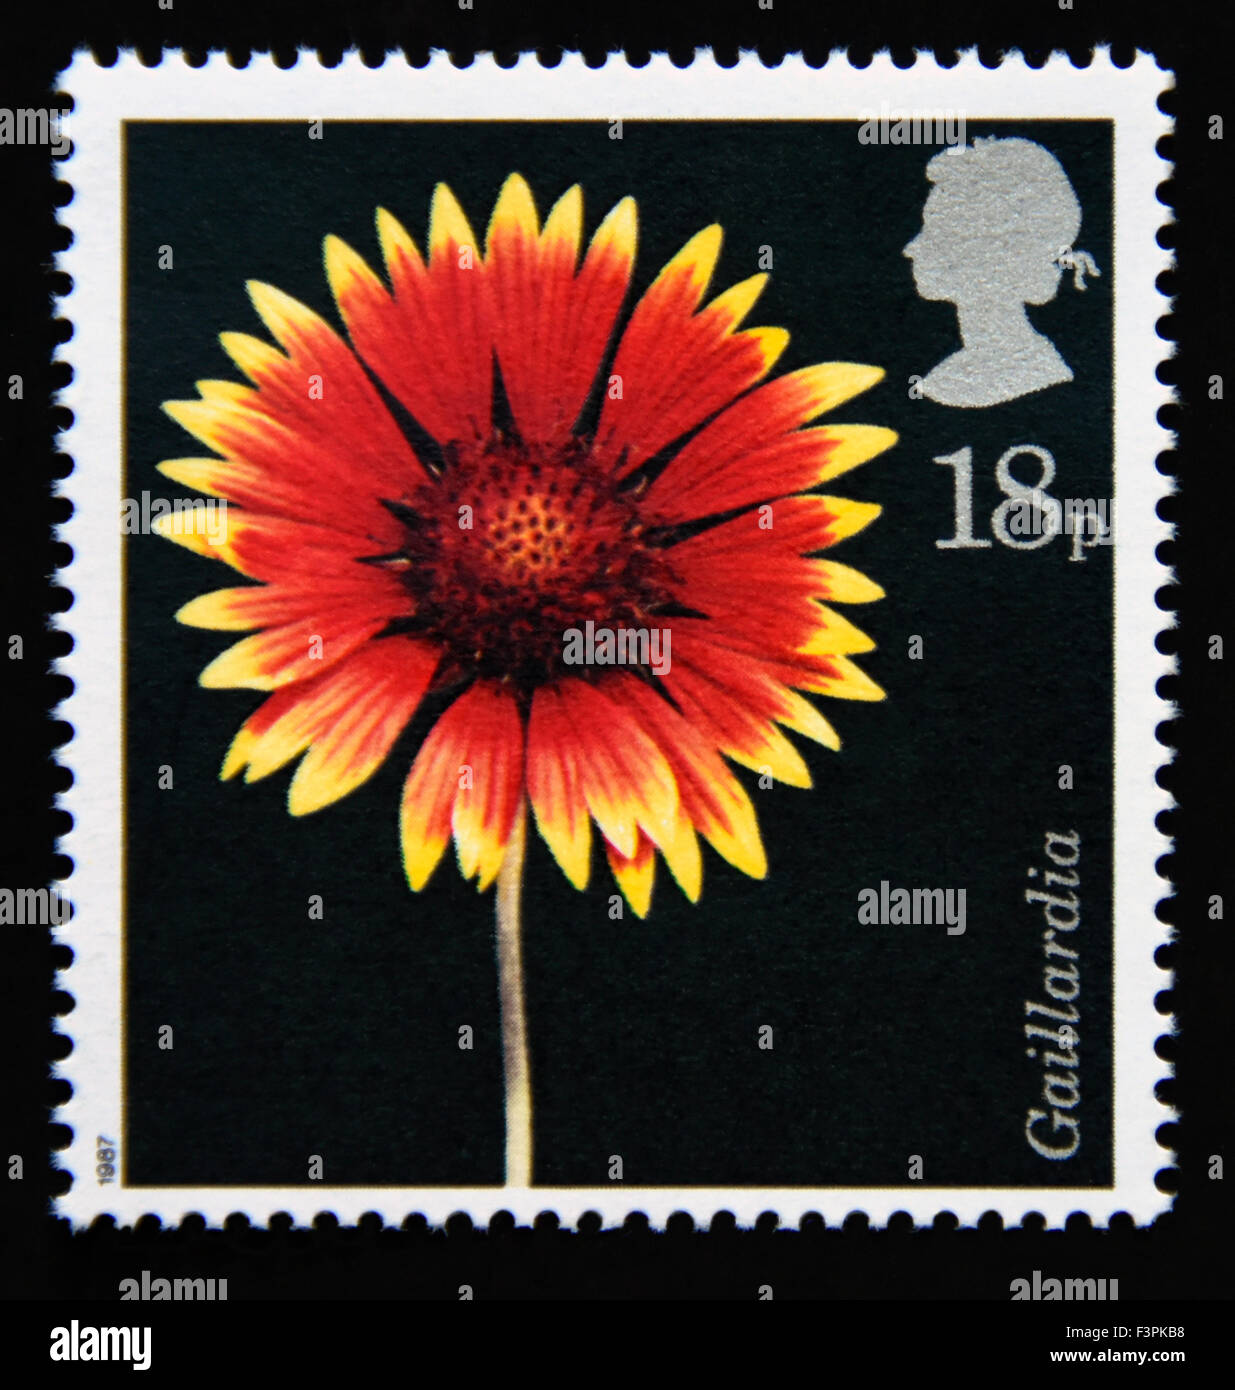 Postage stamp. Great Britain. Queen Elizabeth II. 1987. Flower Photographs by Alfred Lammer. 18p. Stock Photo